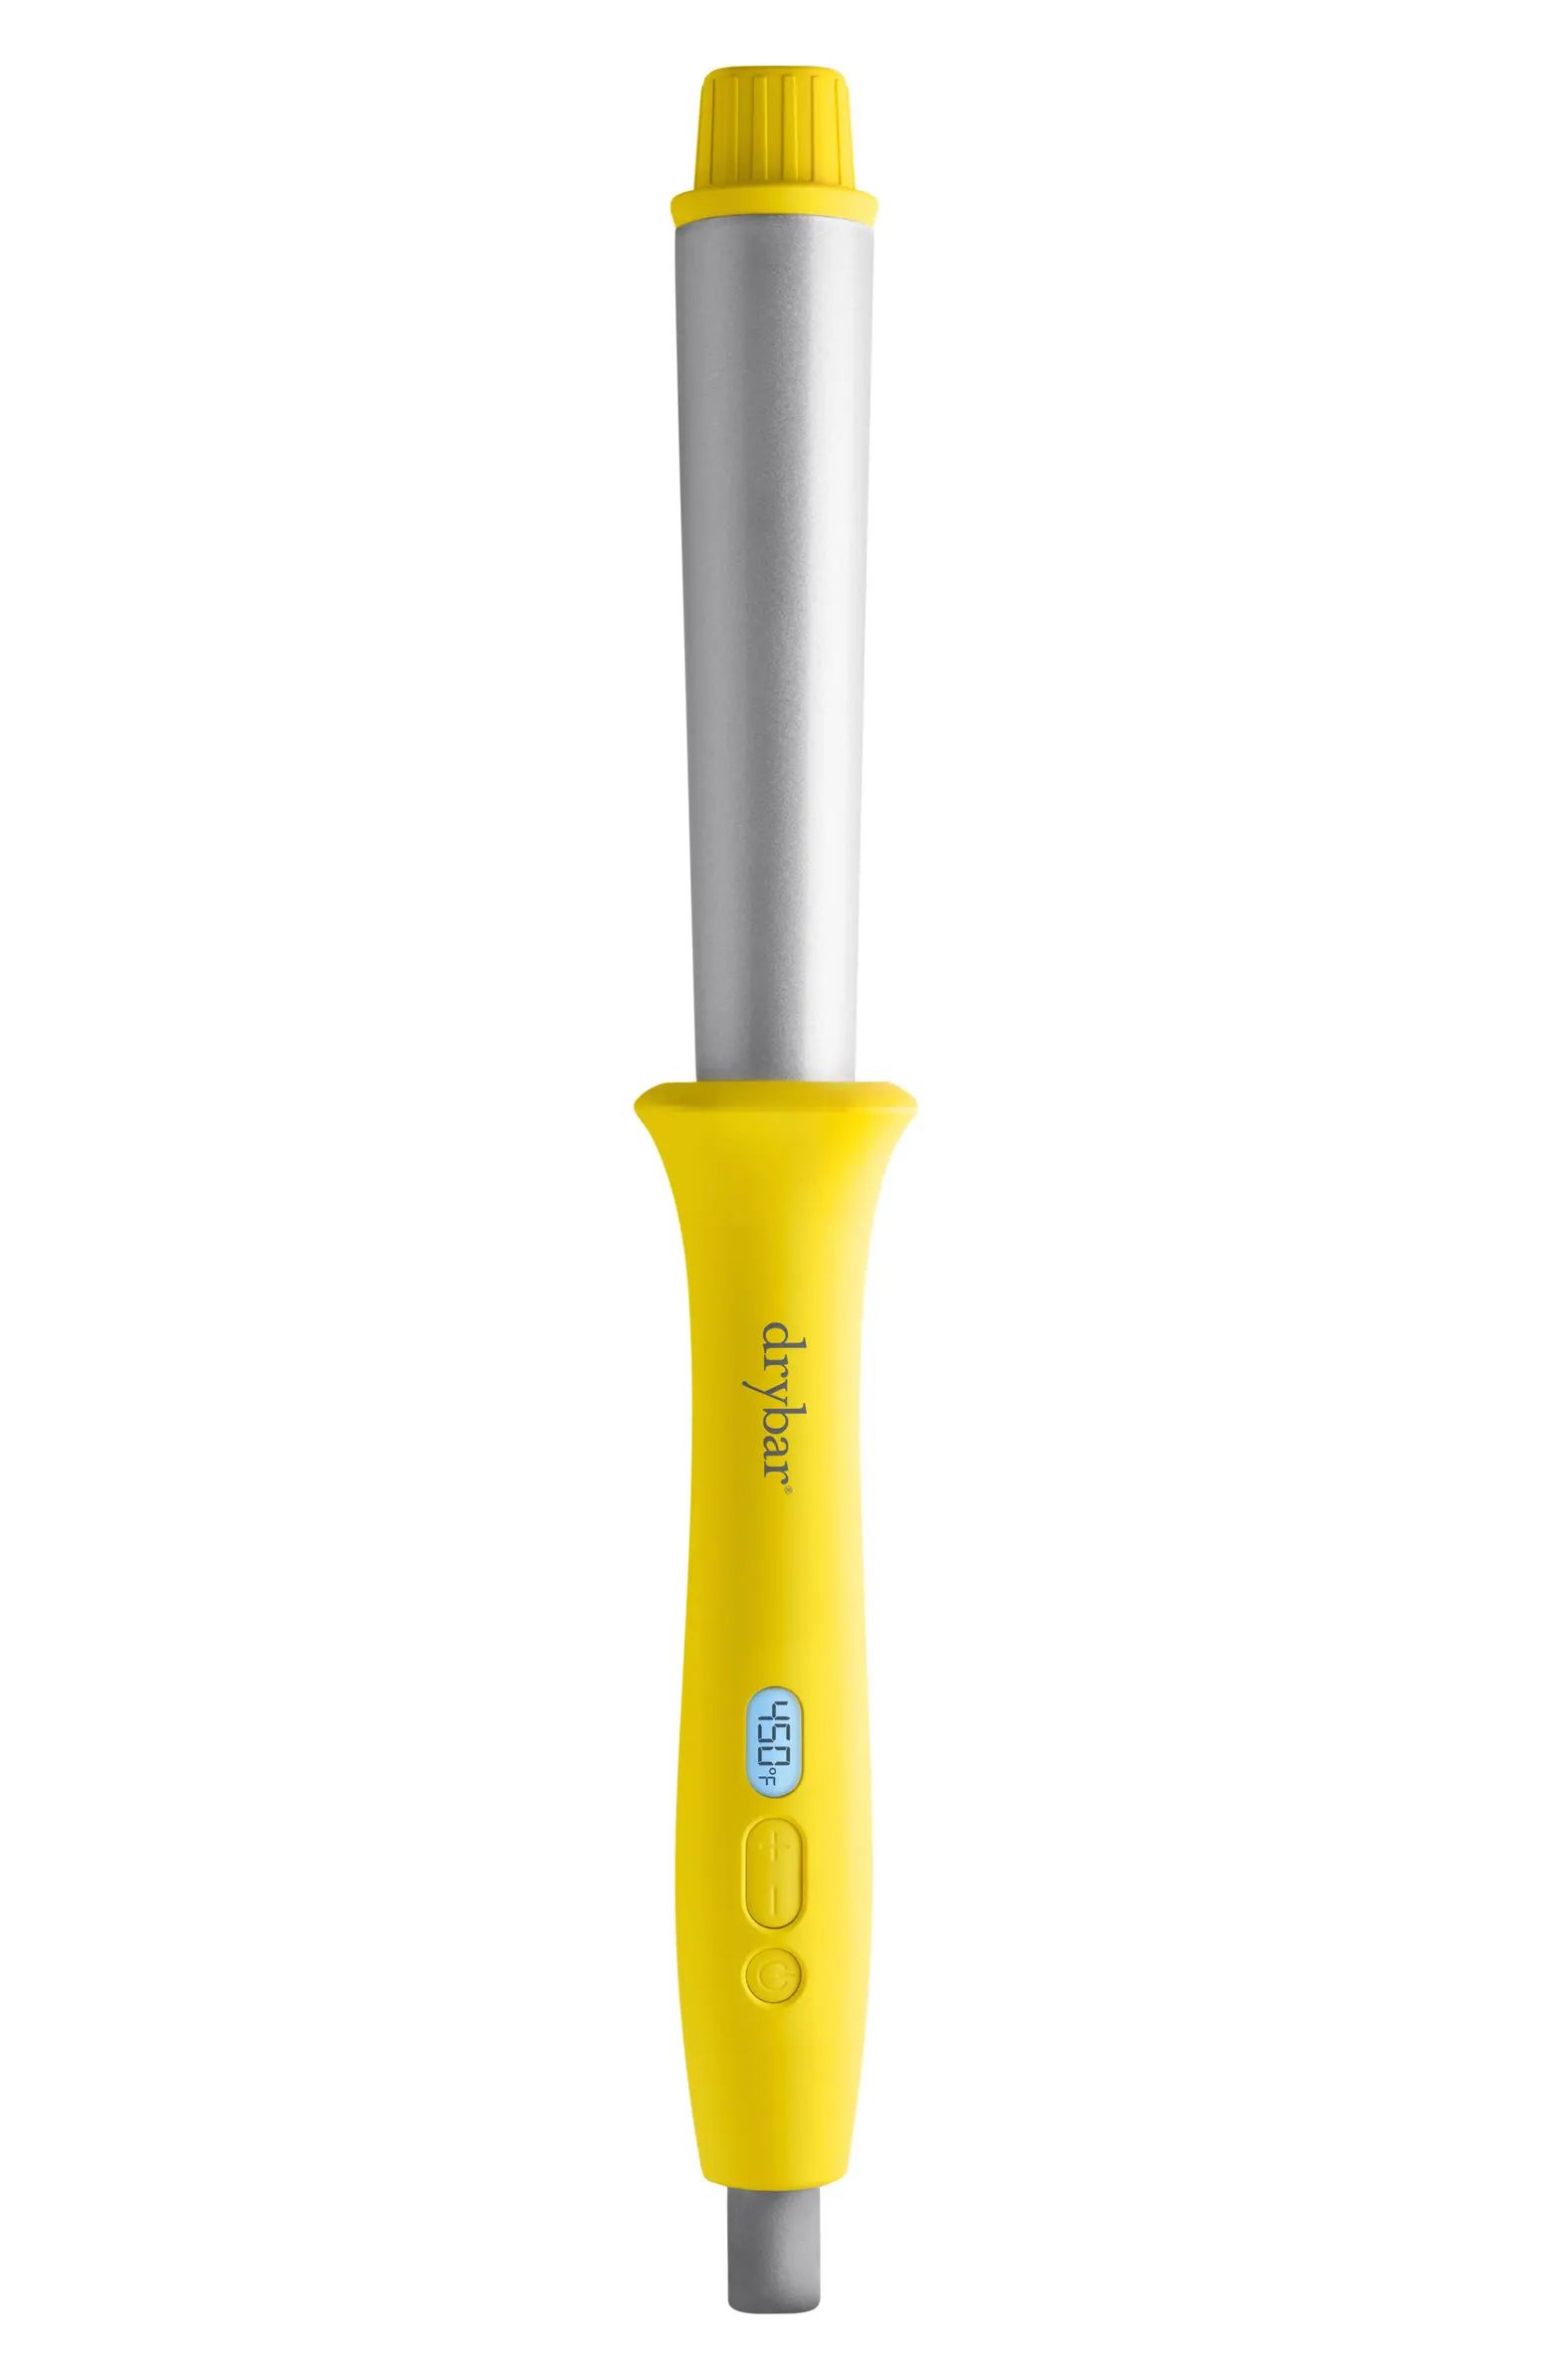 Drybar The Wrap Party Curling & Styling Wand | Nordstrom | Nordstrom